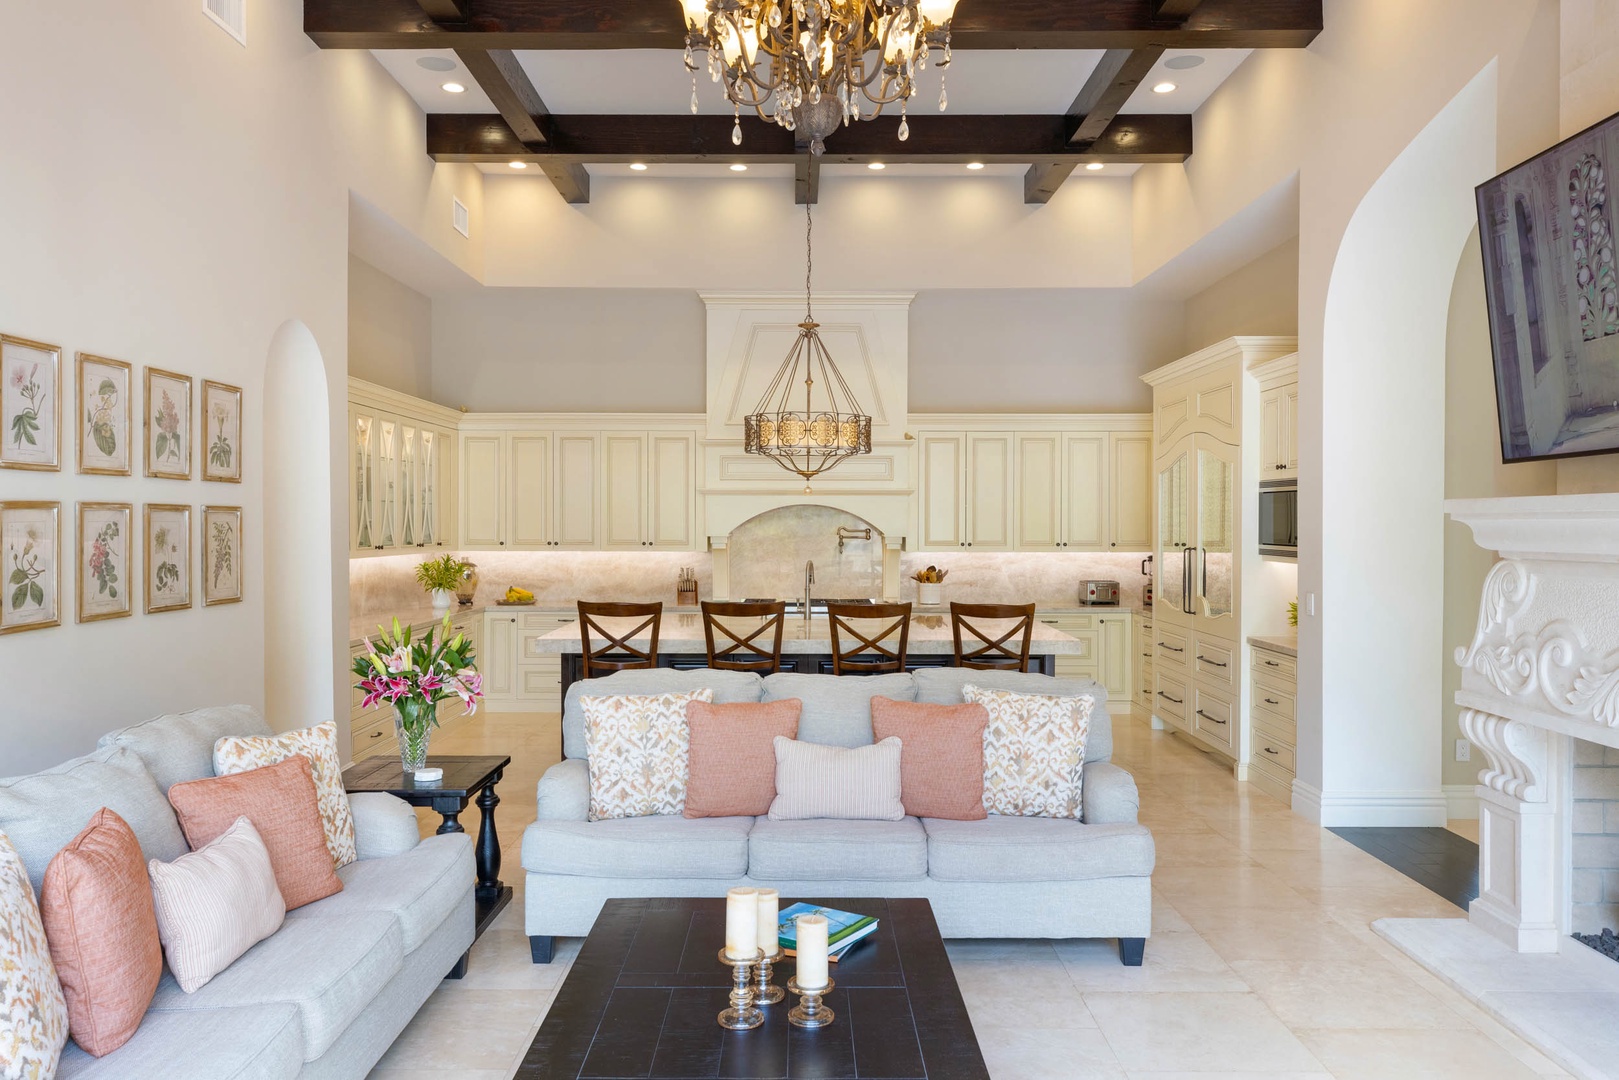 Honolulu Vacation Rentals, Royal Kahala Estate - This elegant and luxurious home provides space for all guests to connect.